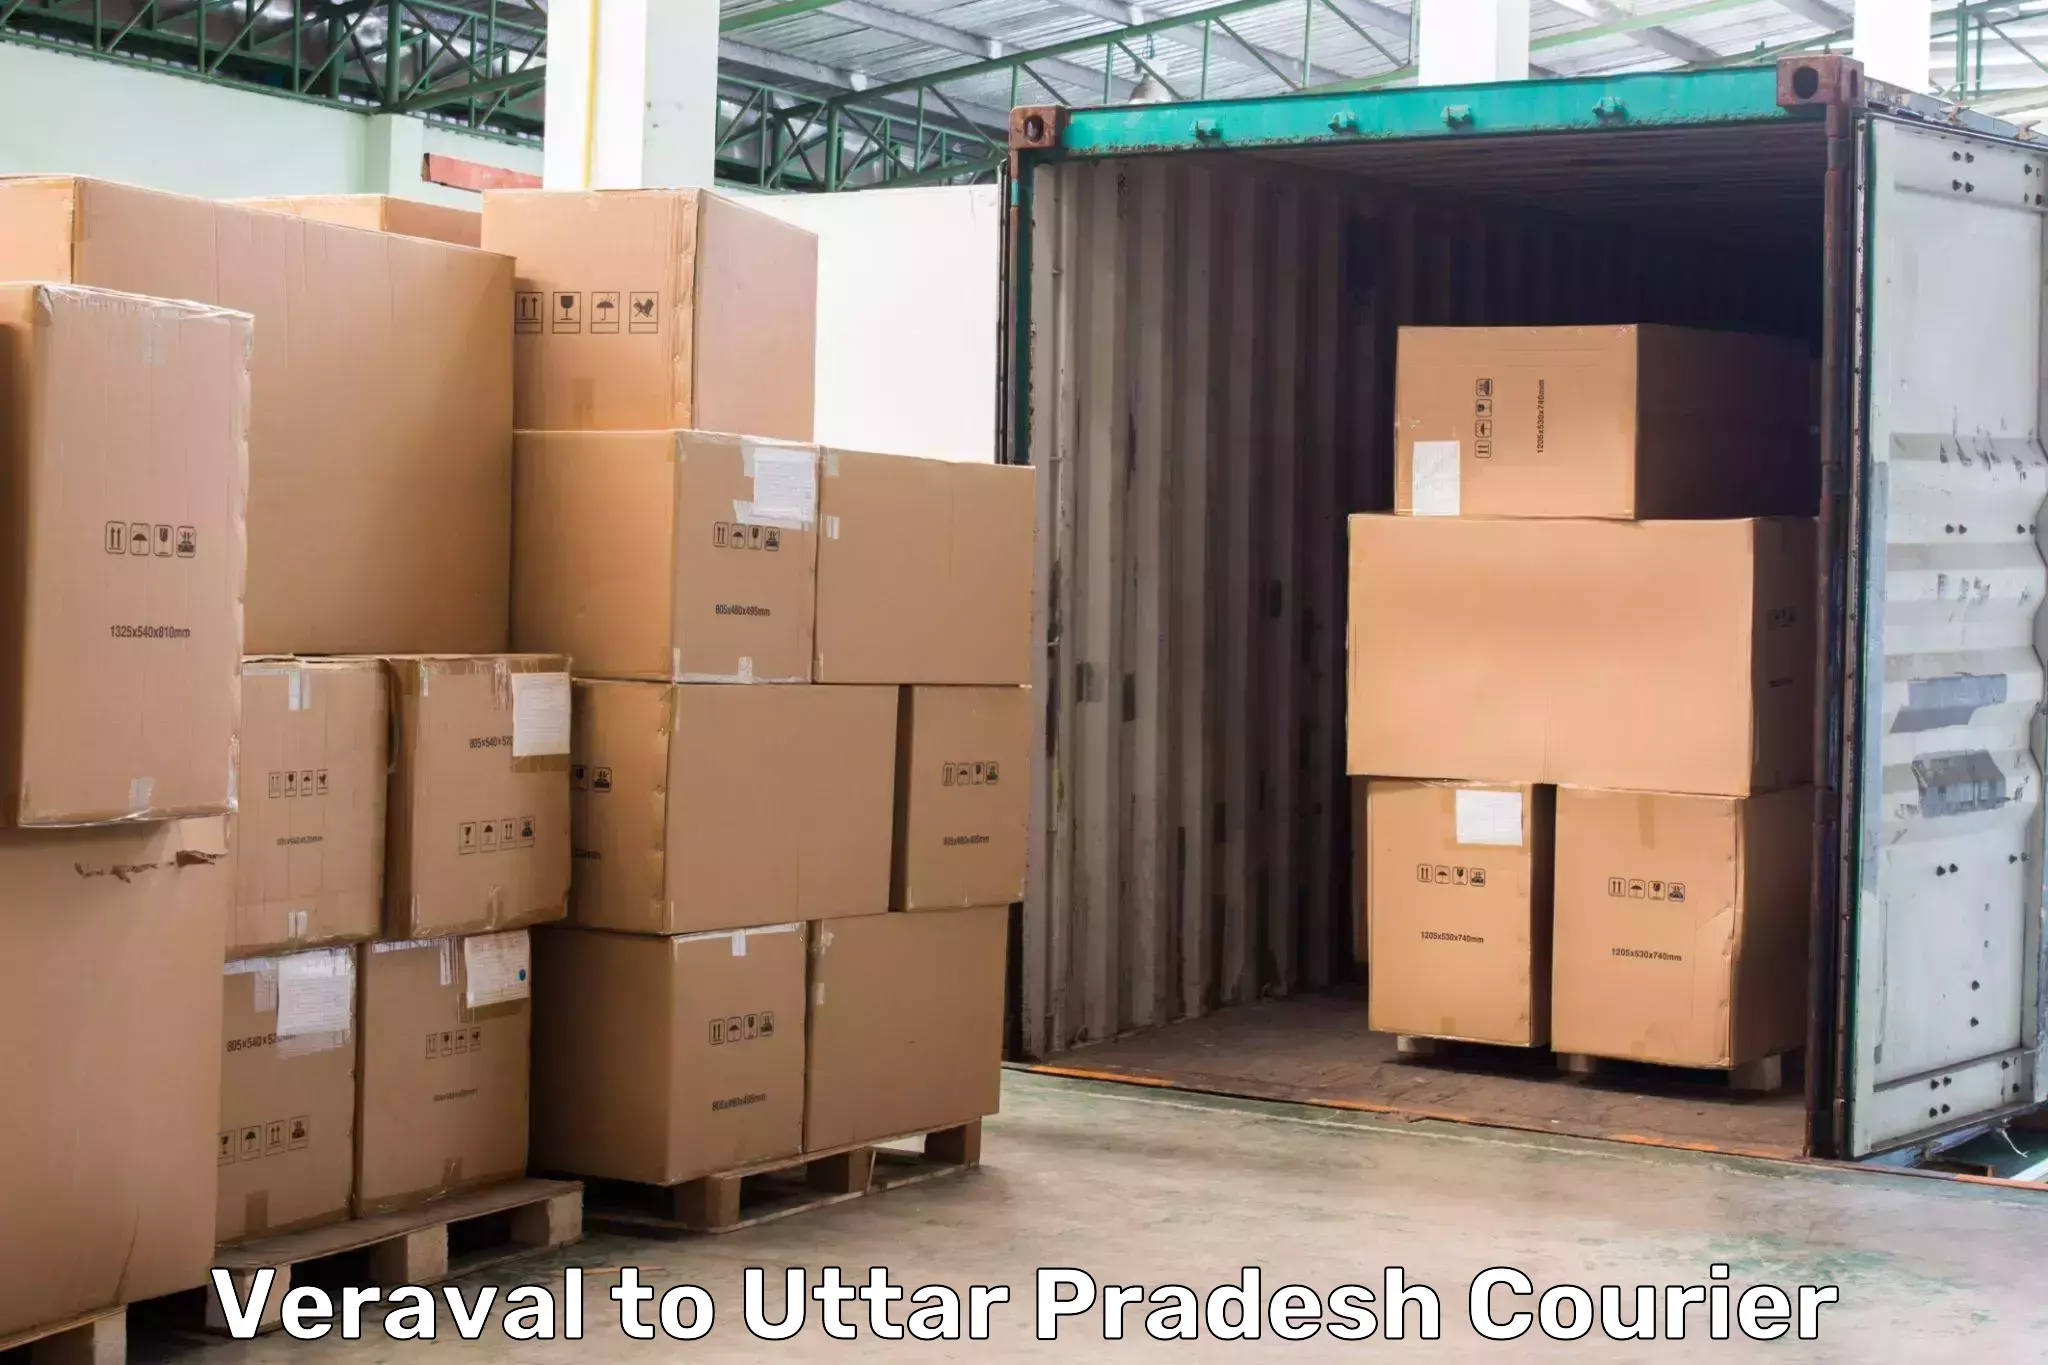 Tech-enabled shipping Veraval to Sultanpur